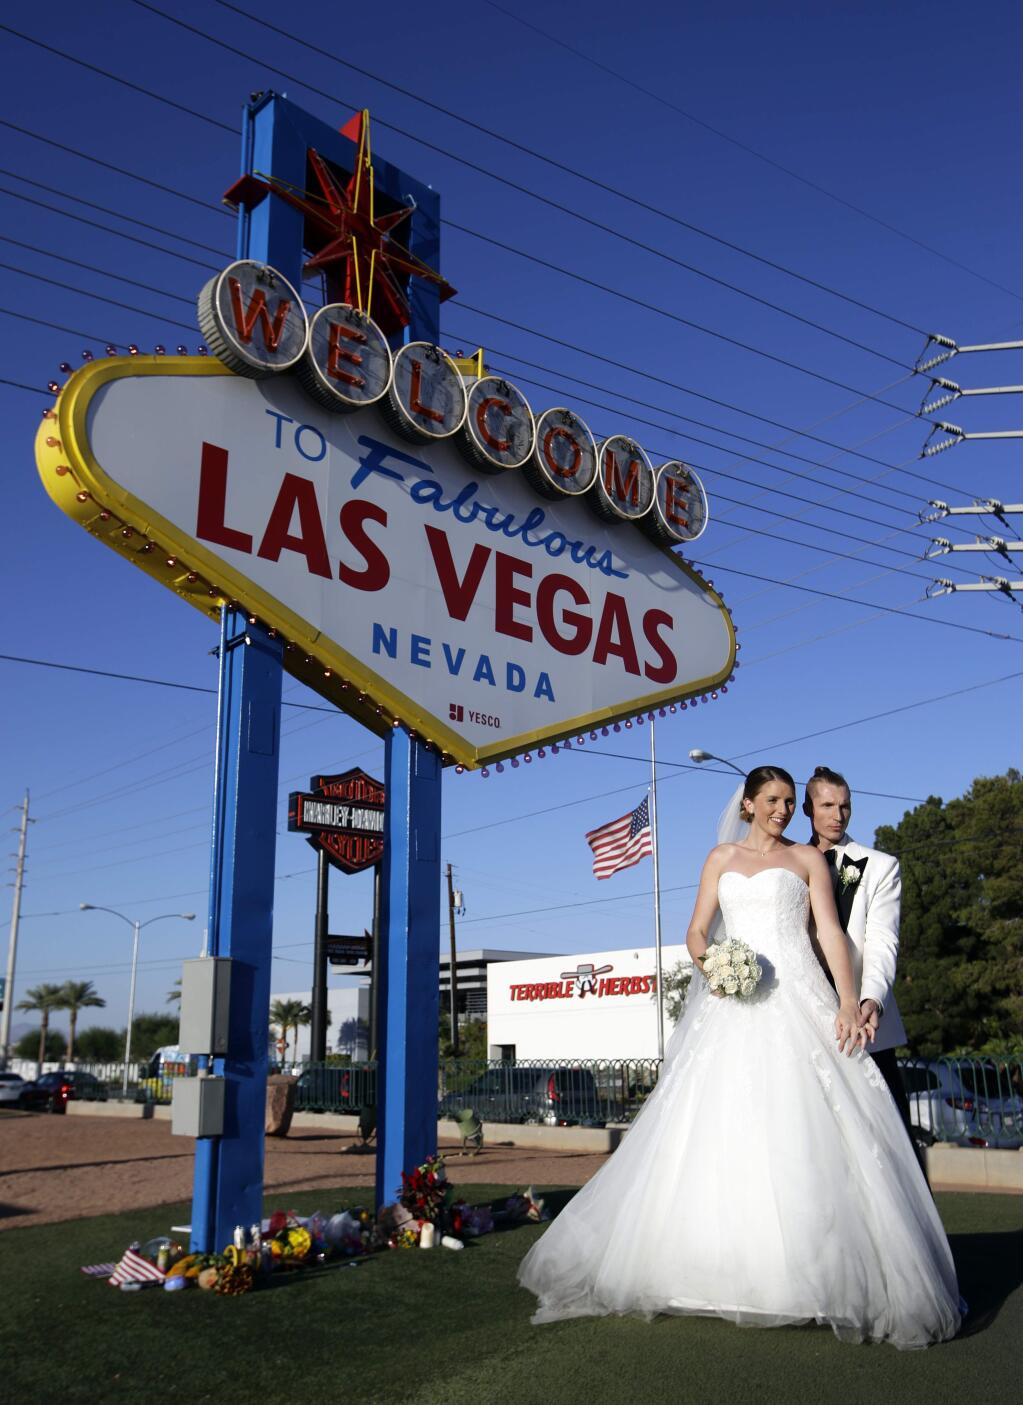 In this Tuesday, Oct. 3, 2017 photo, newlyweds Ann and Sergei Reinchen of Germany, pose for photos in front of the Welcome to Las Vegas sign that has flowers honoring the people who died in a mass shooting on Sunday in Las Vegas. But even though the city is in mourning, for many it is business as usual with celebrations and parties continuing. (AP Photo/Chris Carlson)